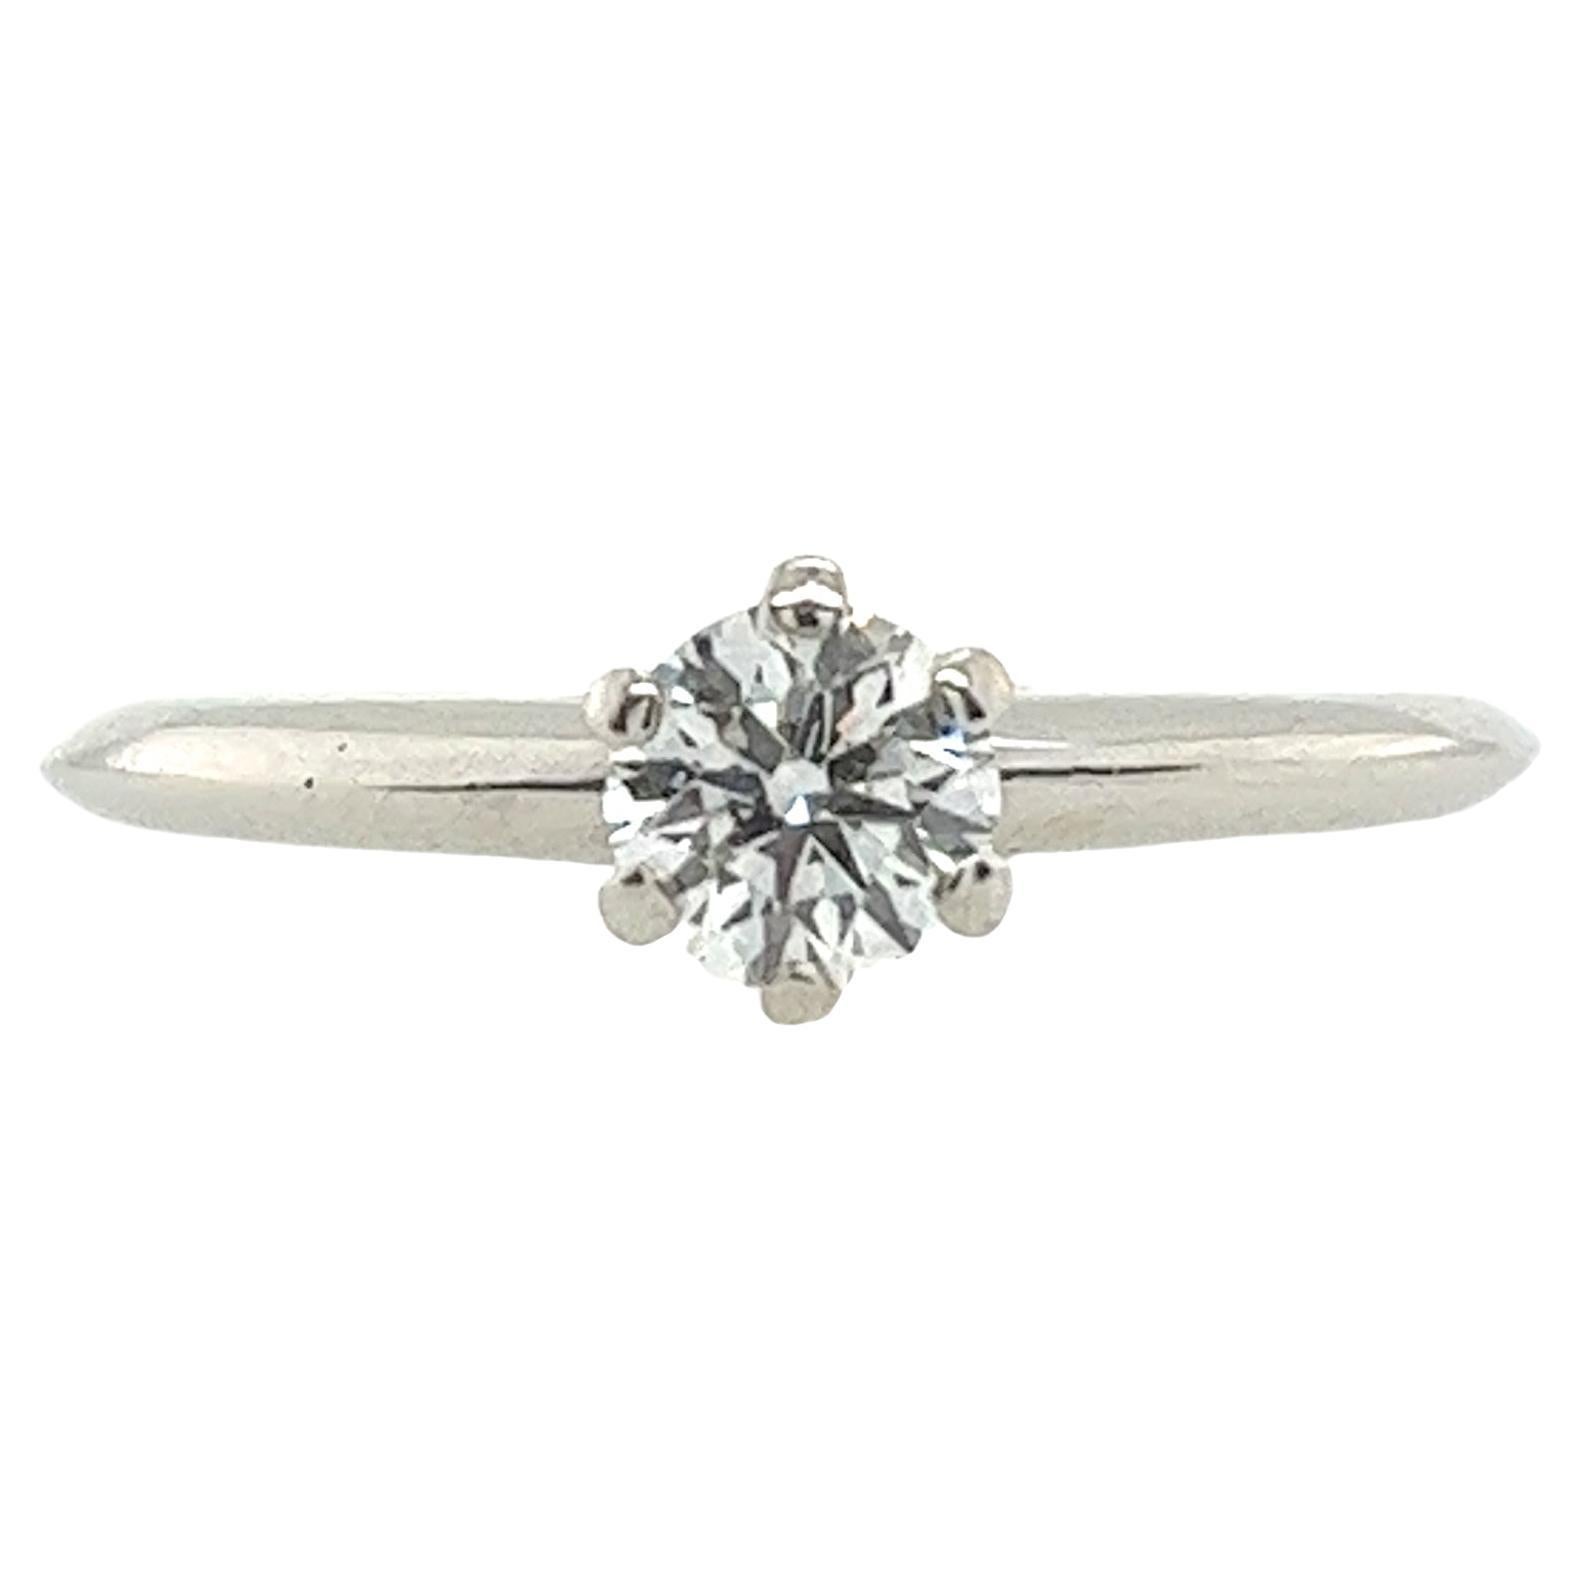 What is a Tiffany style solitaire?